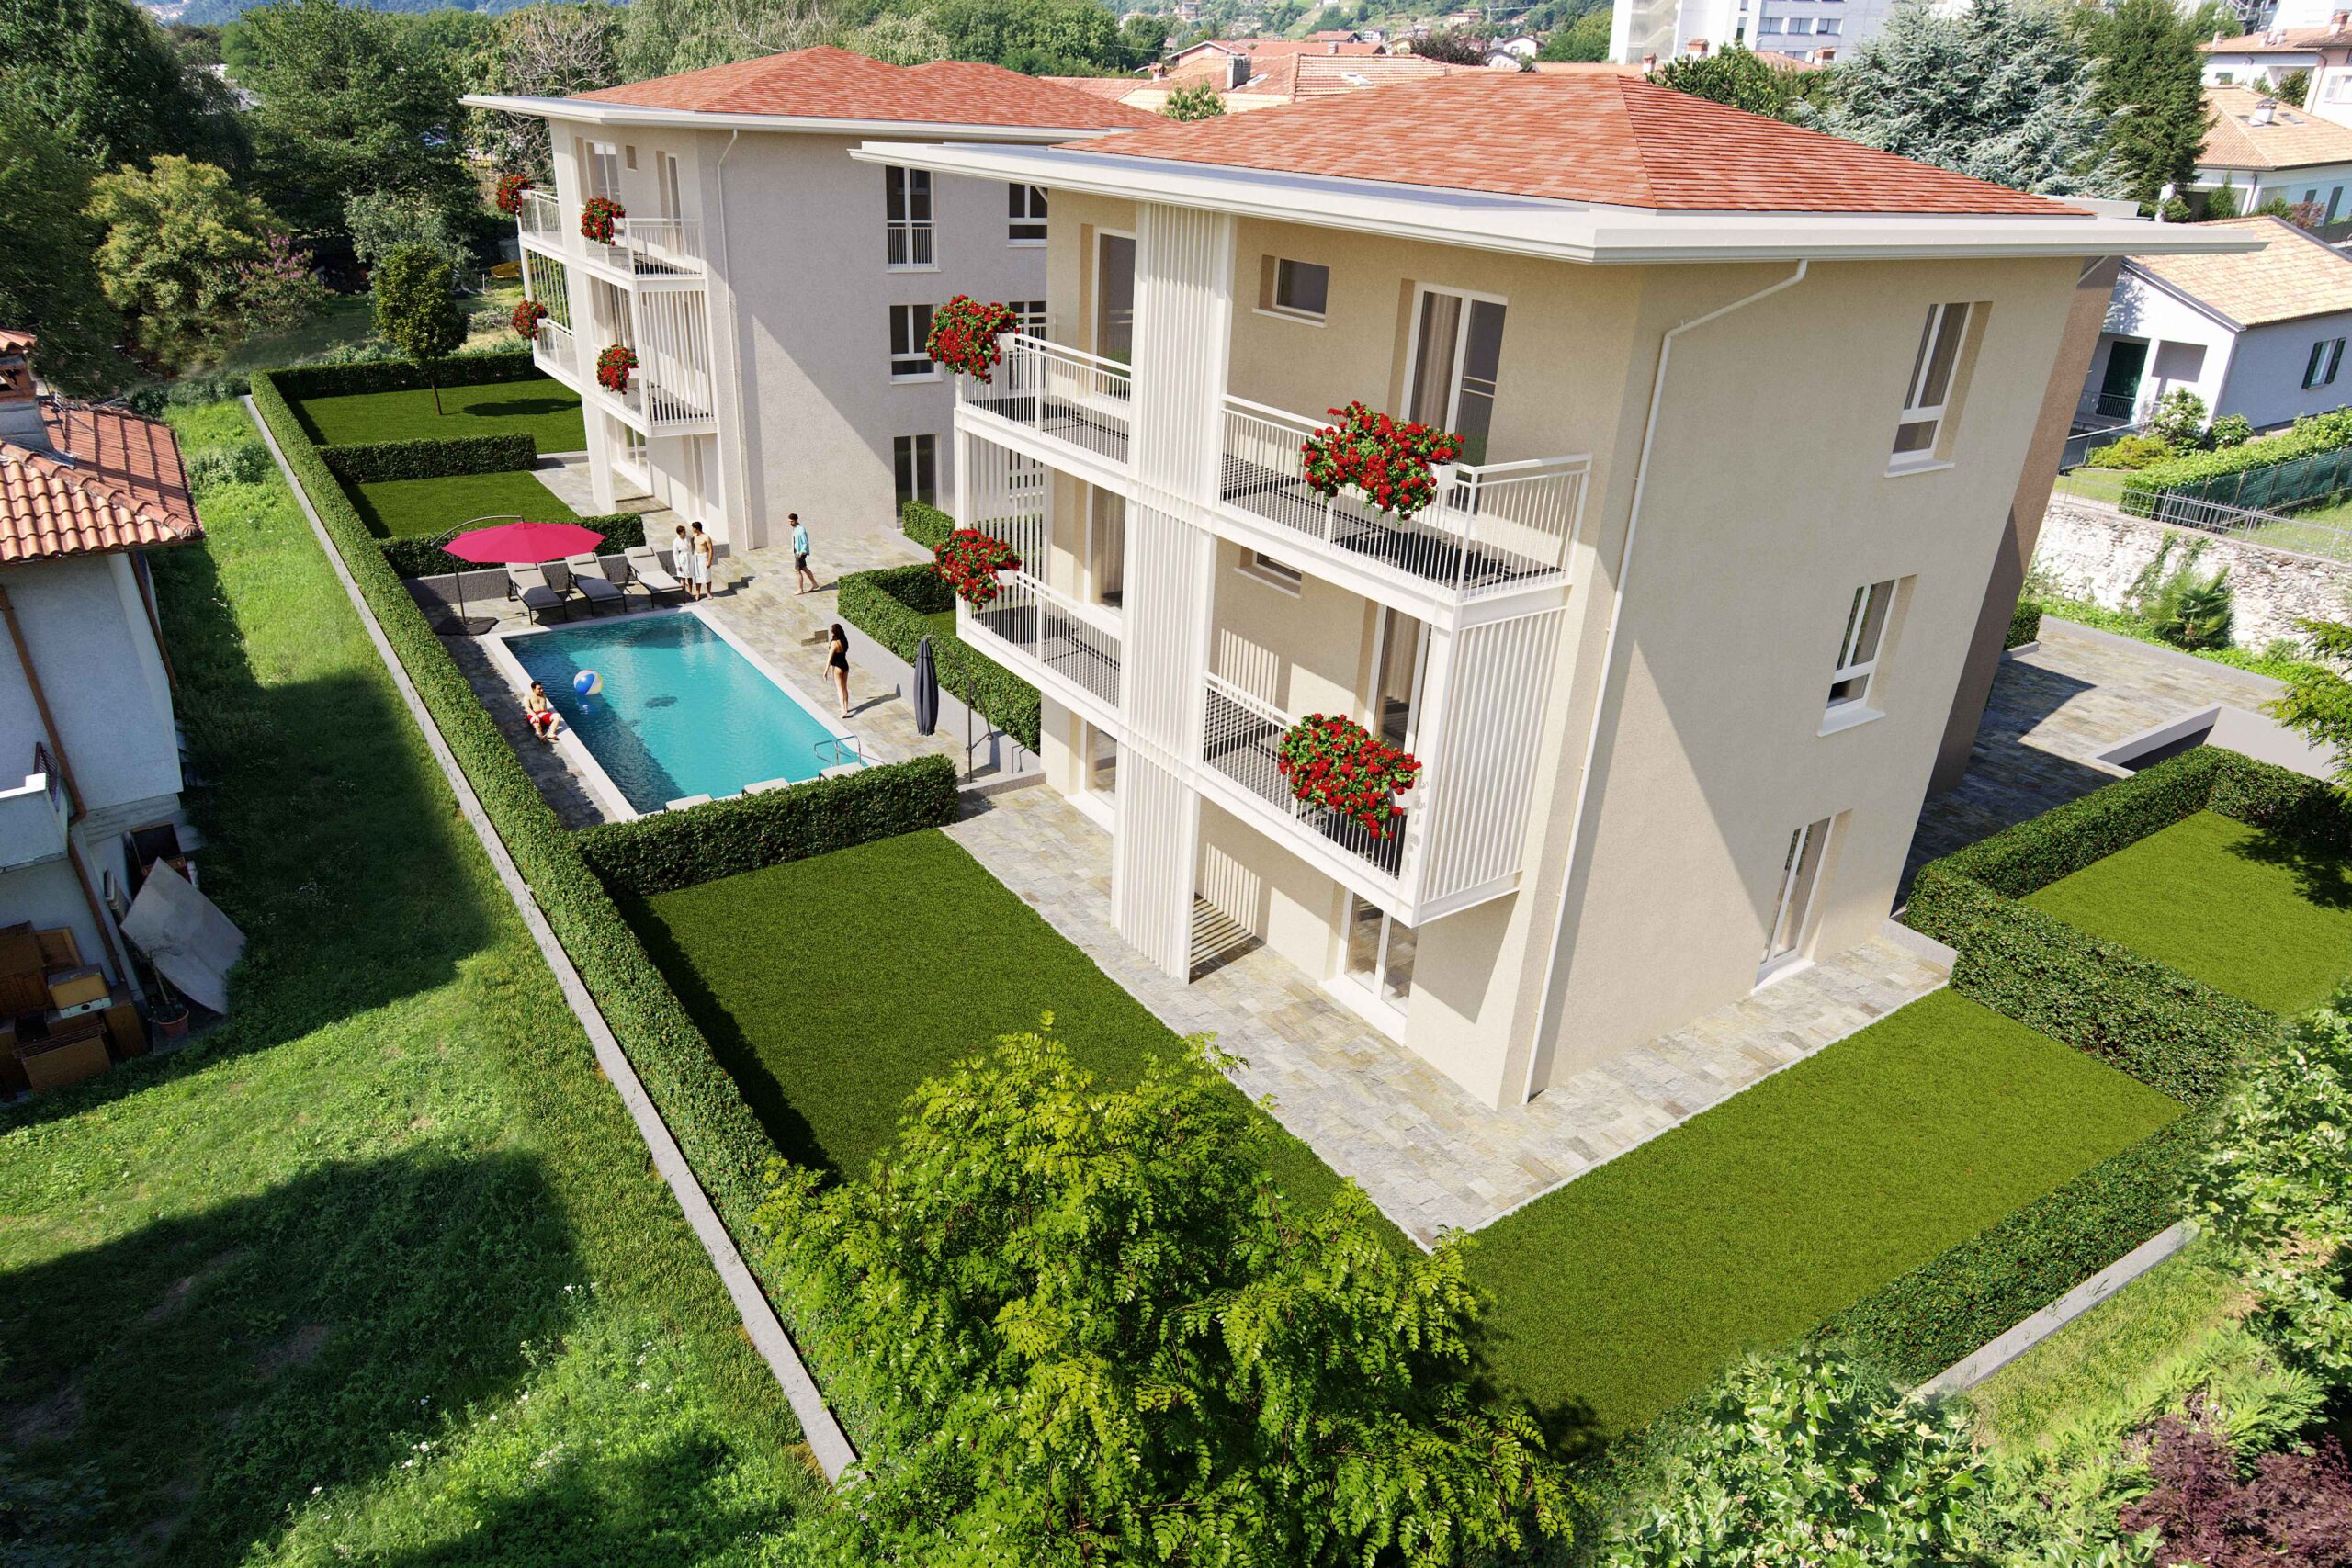 Gravedona ed Uniti – New apartments in residence with swimming pool